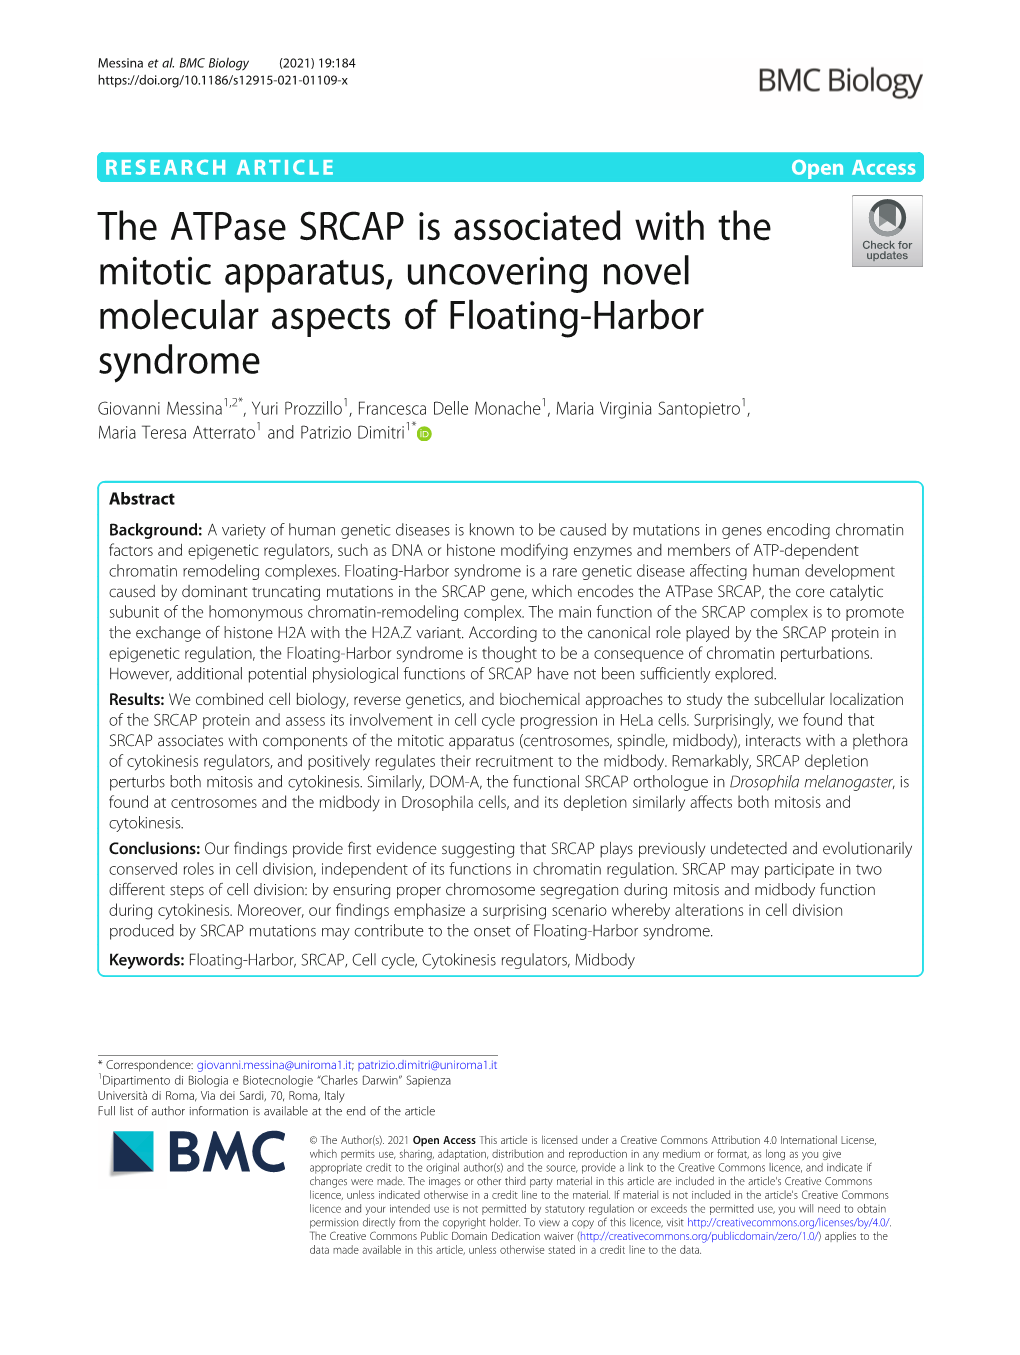 The Atpase SRCAP Is Associated with the Mitotic Apparatus, Uncovering Novel Molecular Aspects of Floating-Harbor Syndrome